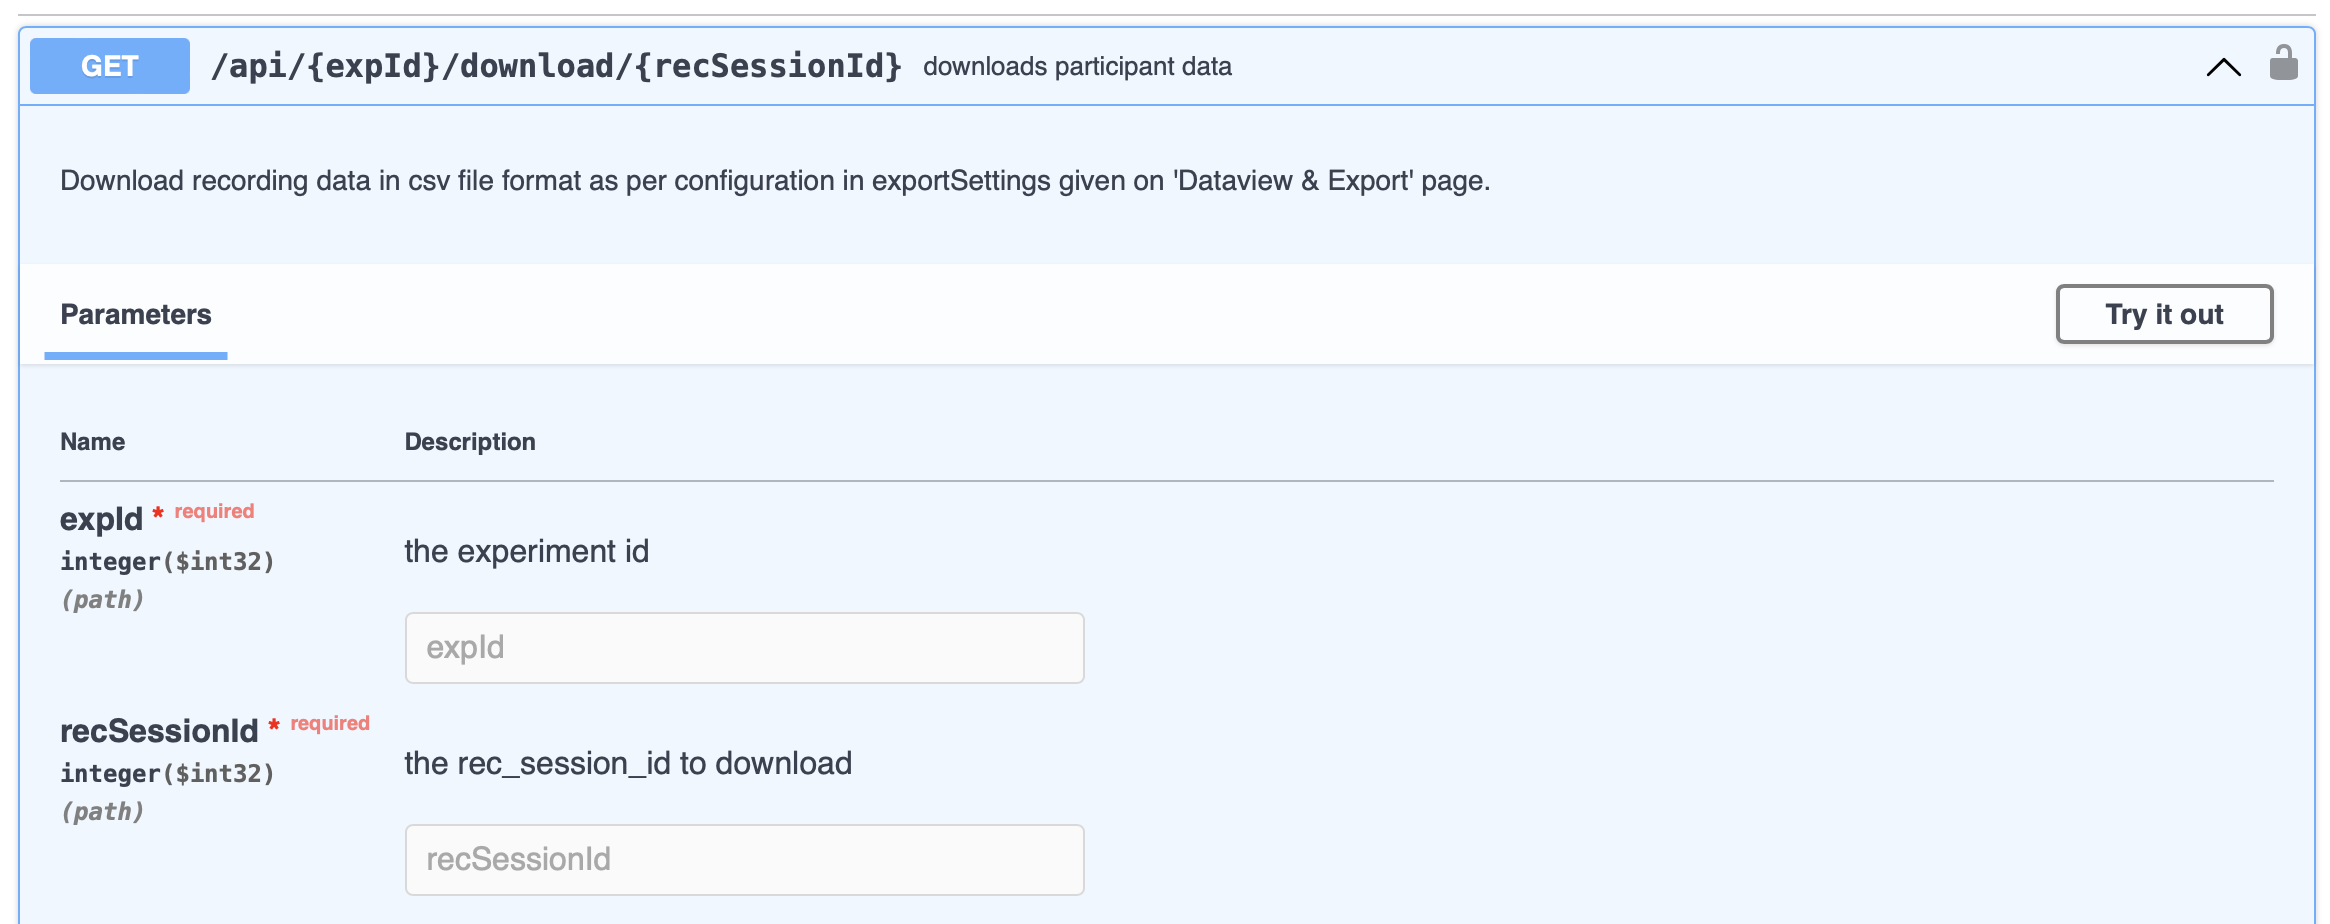 Dialog for specifying the experiment id and session numbers for fetching data via the REST API